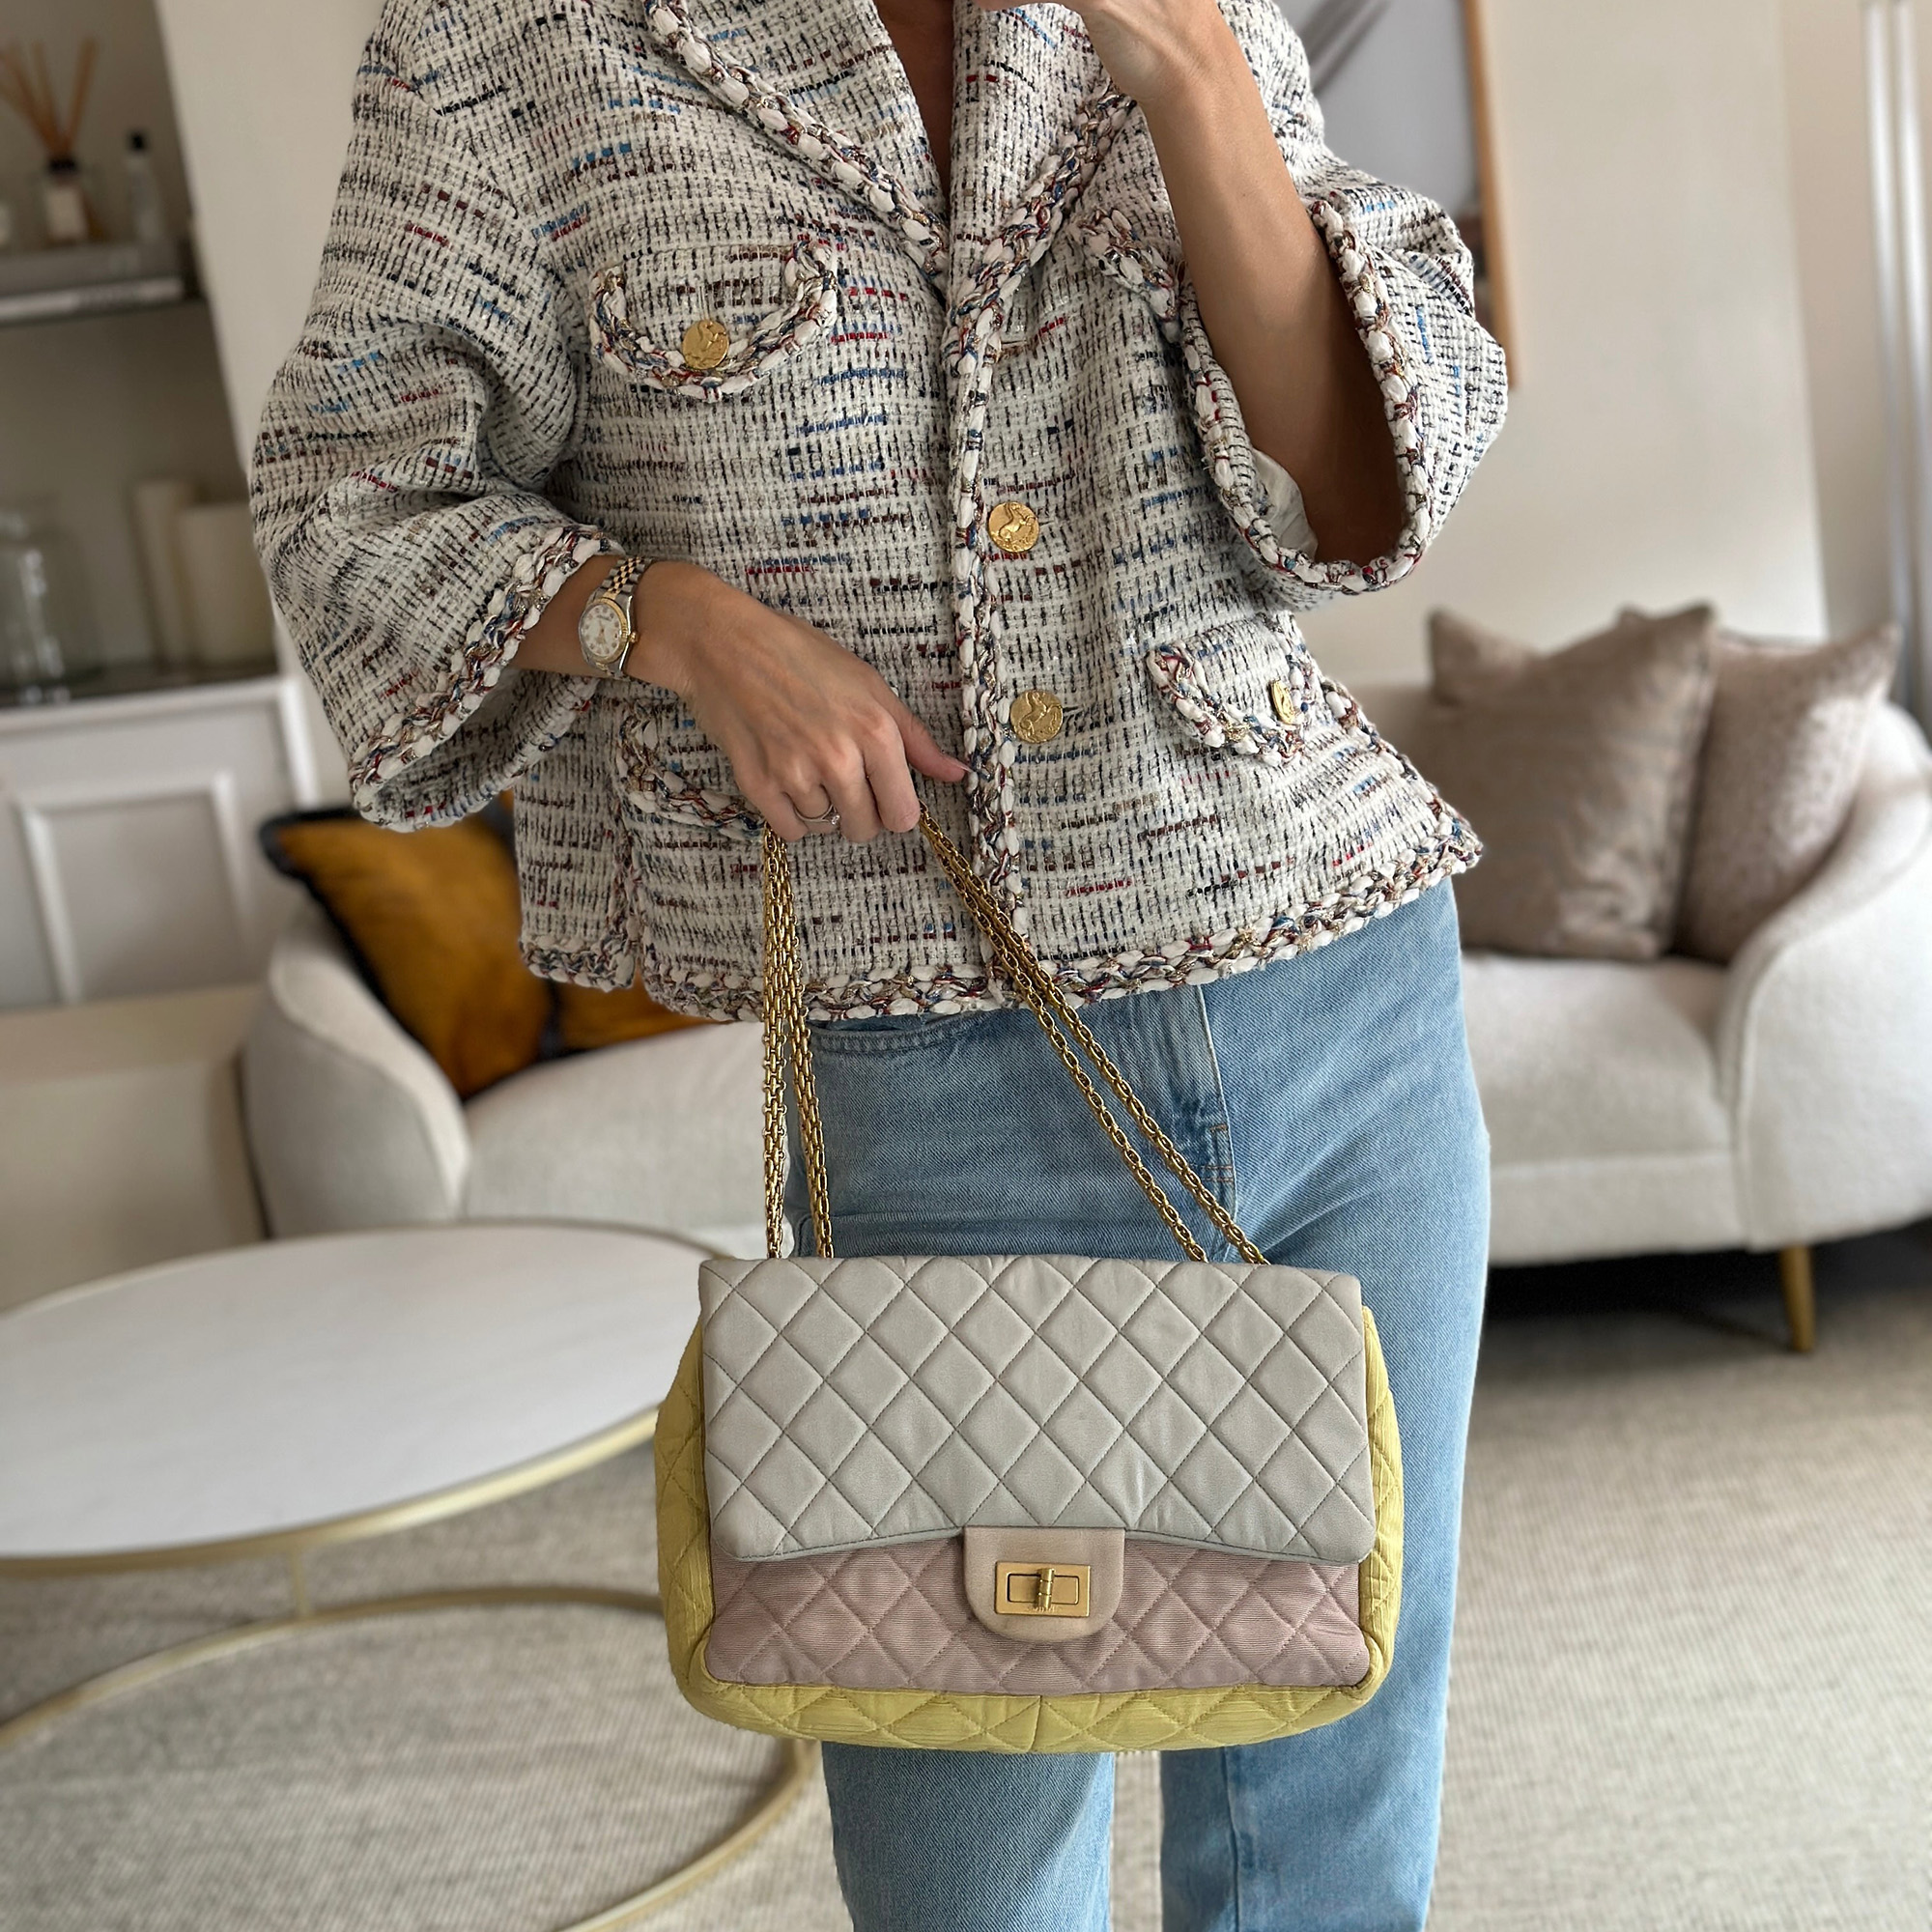 Chanel Large Jersey Reissue Pastel Yellow, Grey And Pink With Antique Gold Hardware